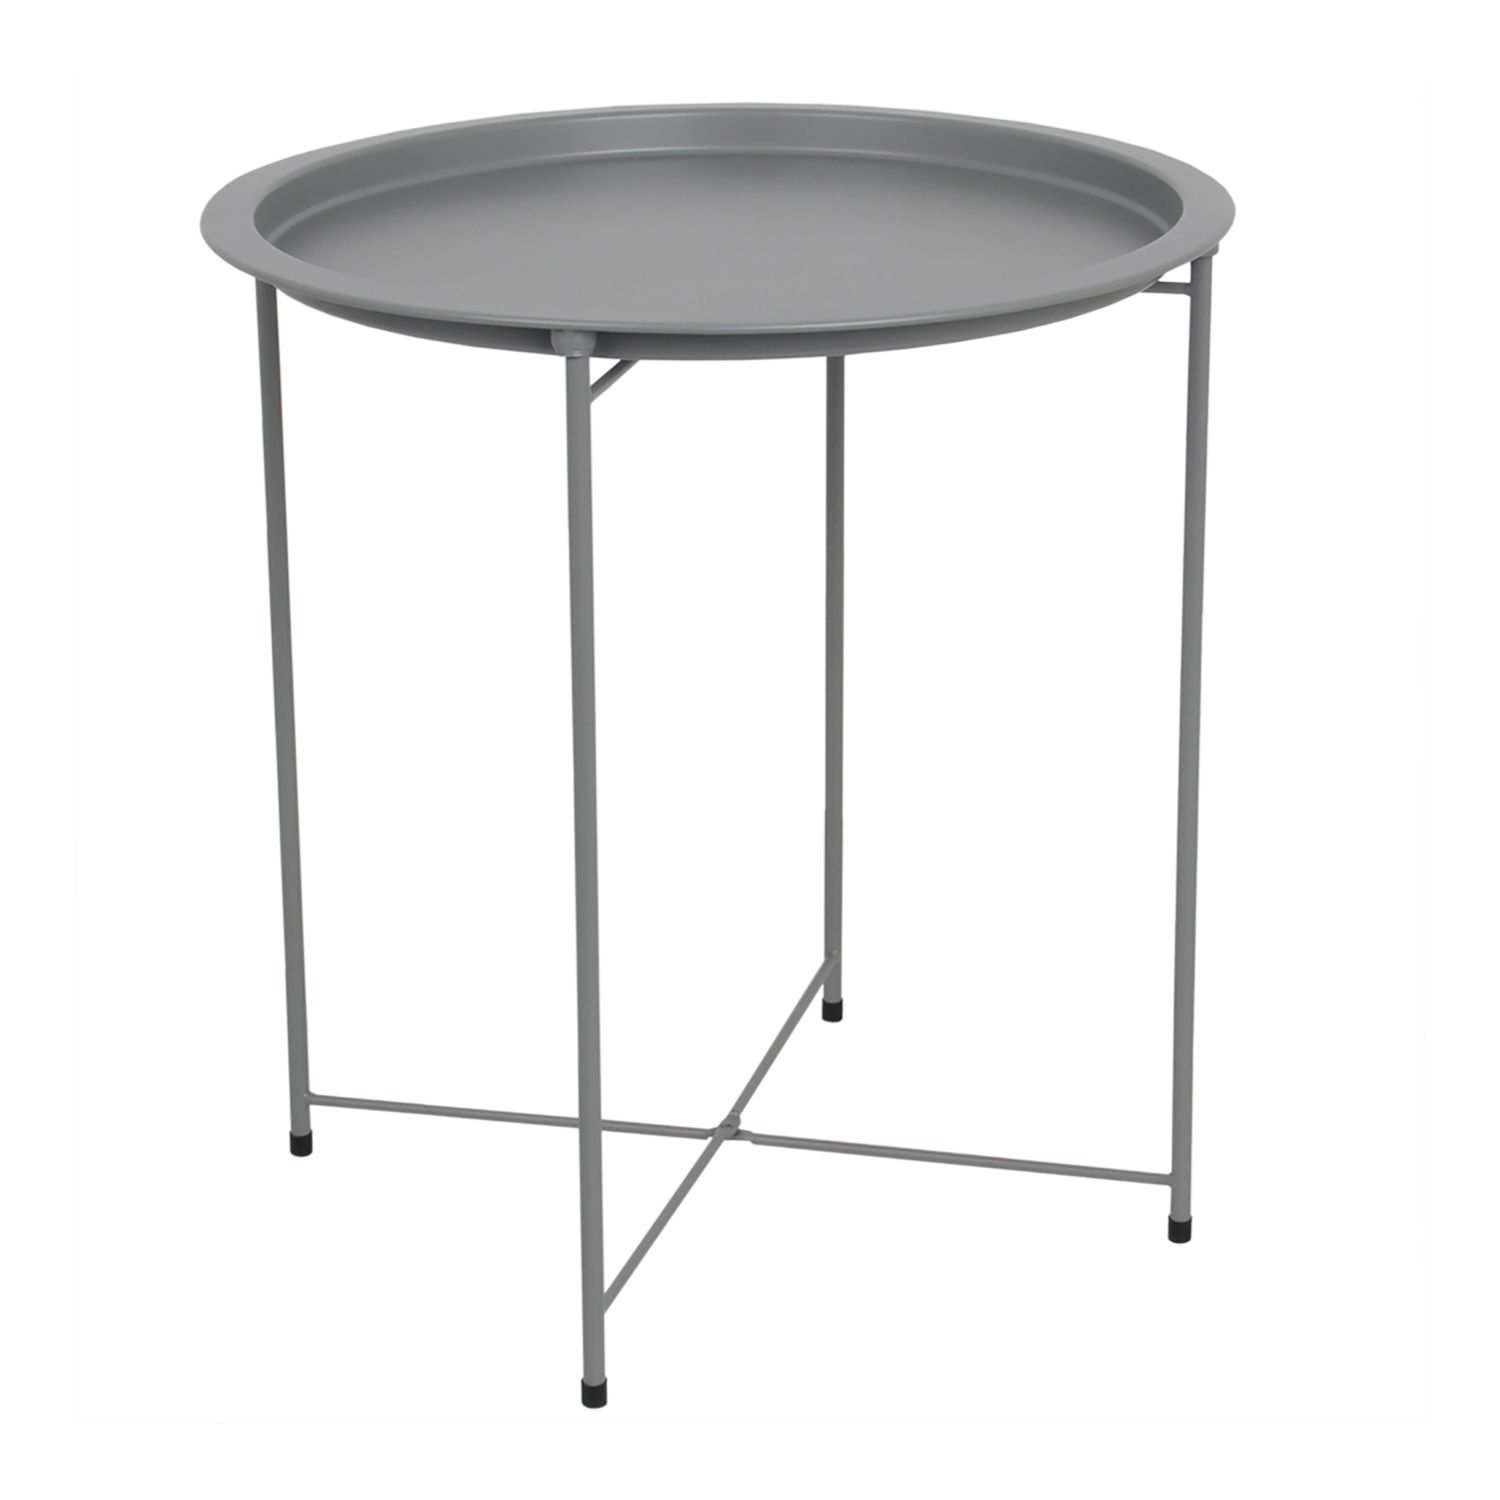 Image for Home Basics Foldable Round Accent Table at Kohl's.